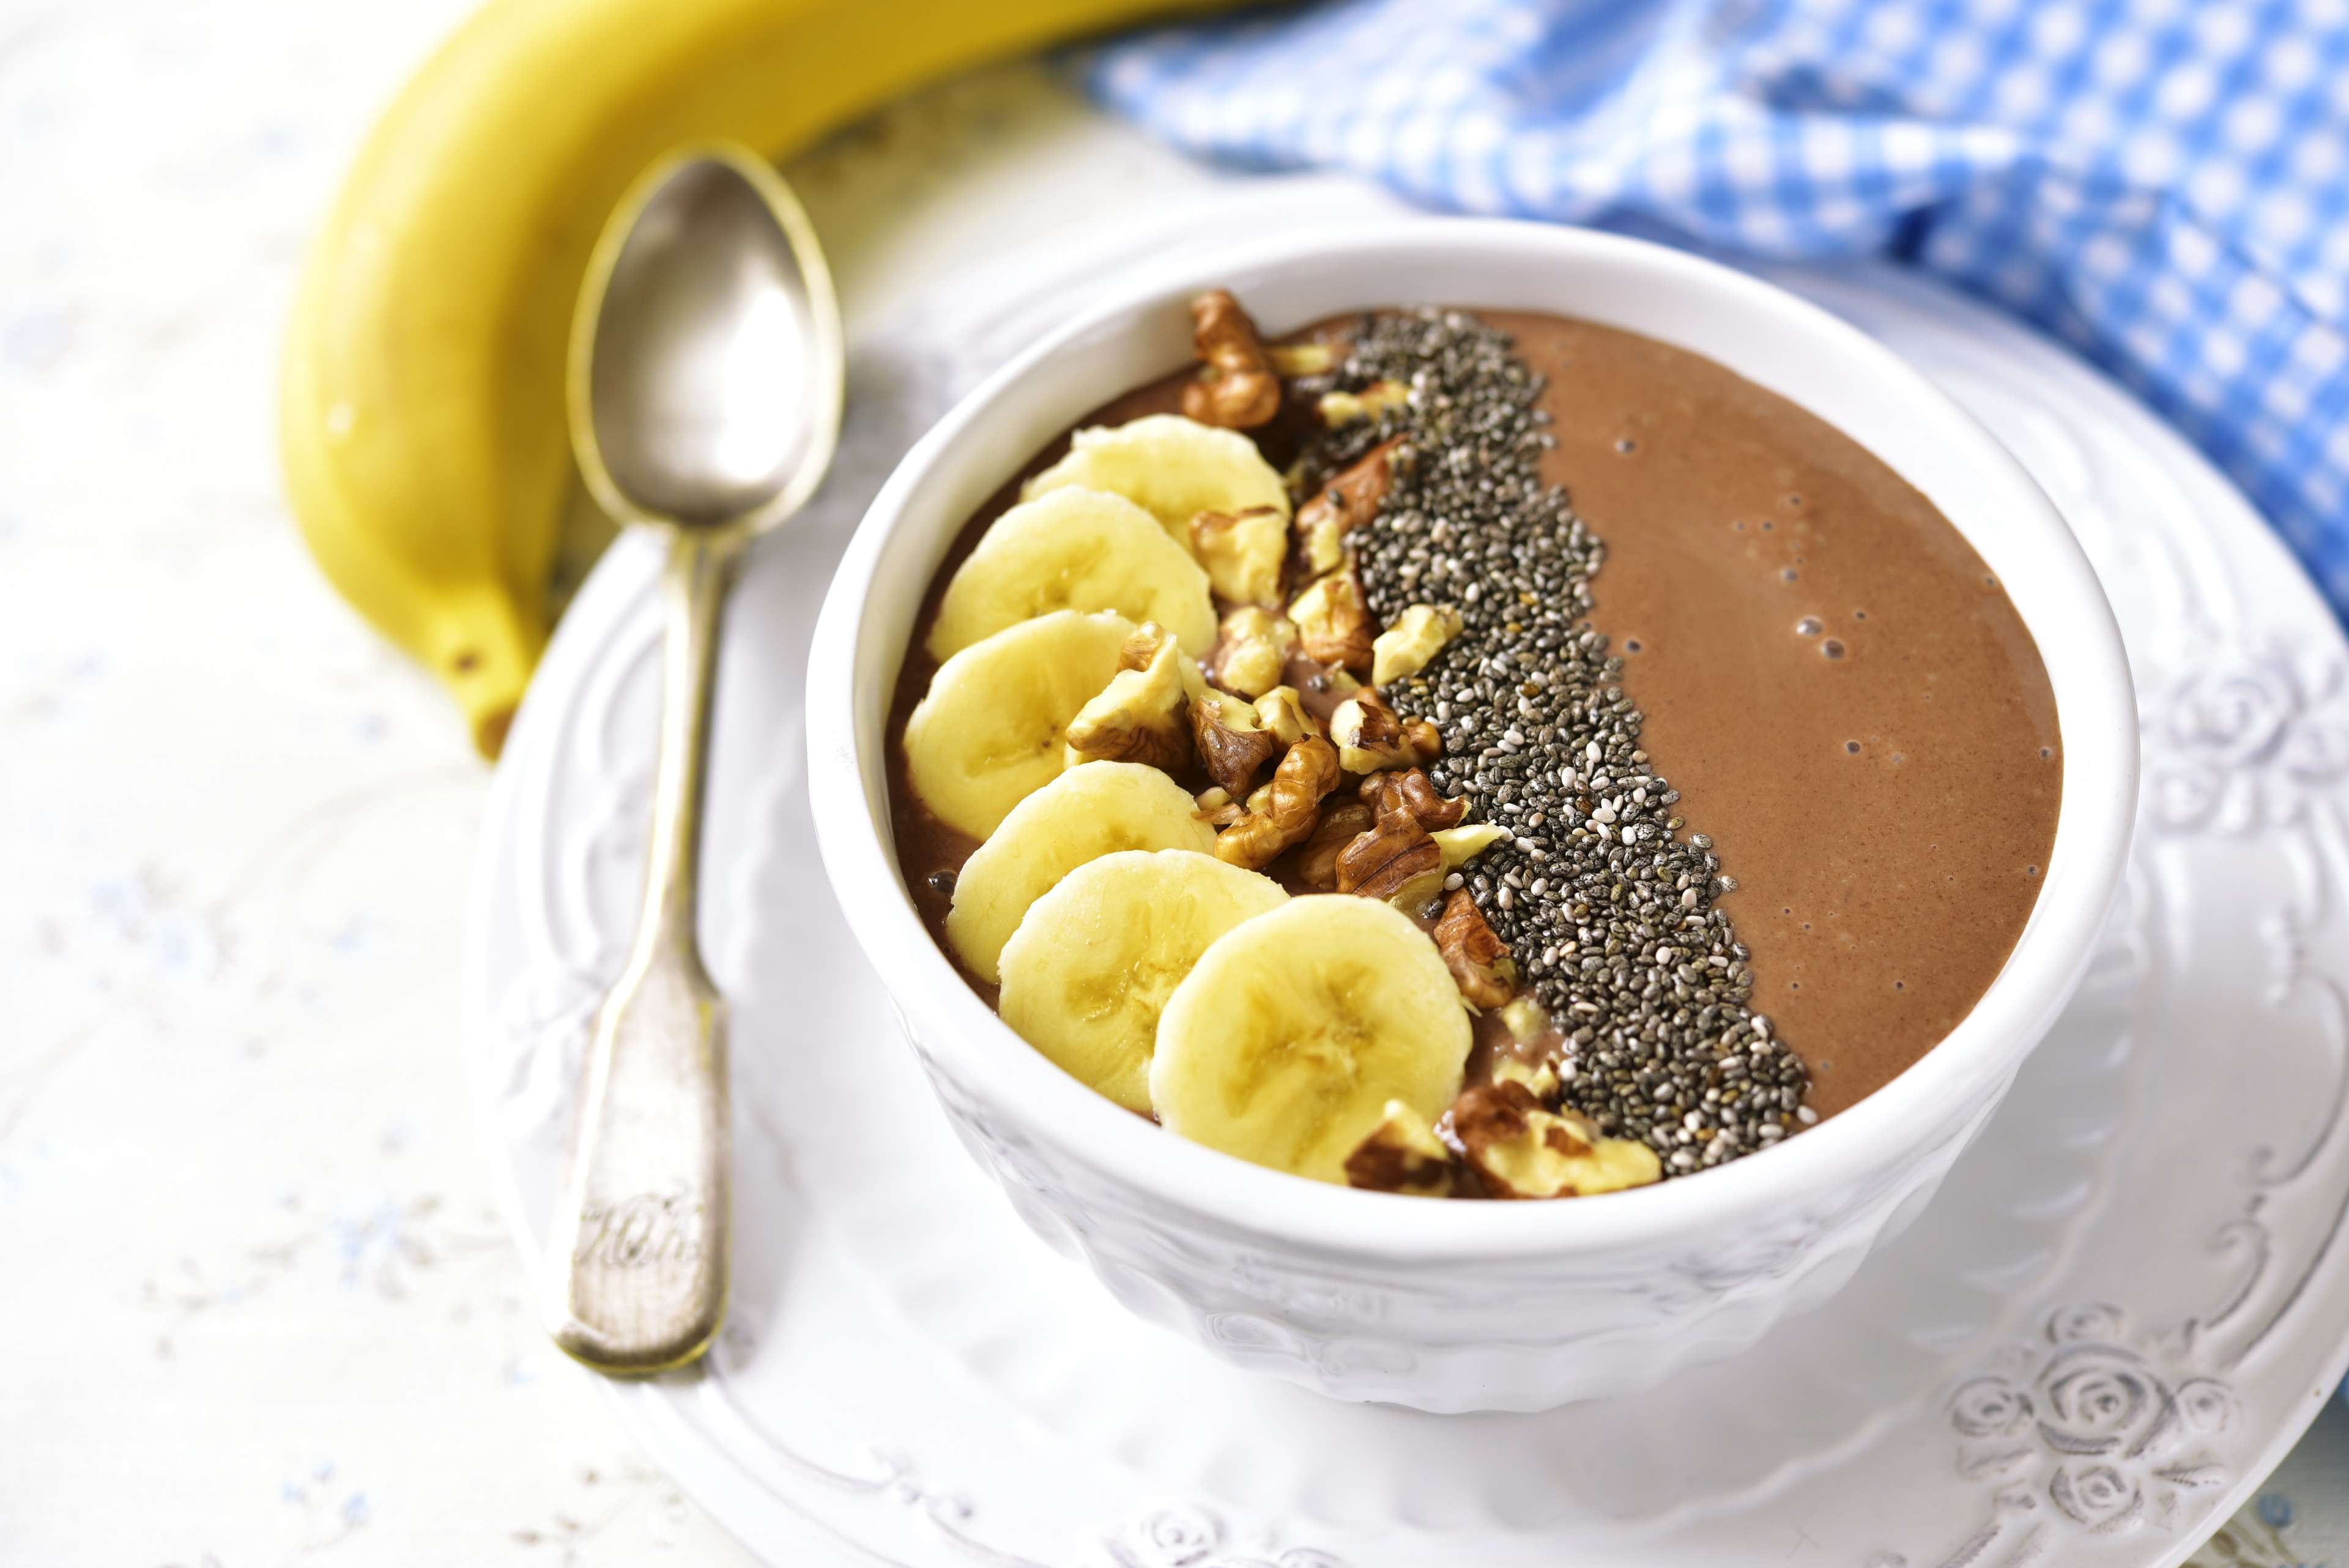 61ad3c4557d6d22731158a1f_Chocolate%20banana%20smoothie%20with%20walnuts%20and%20chia%20seed..jpeg